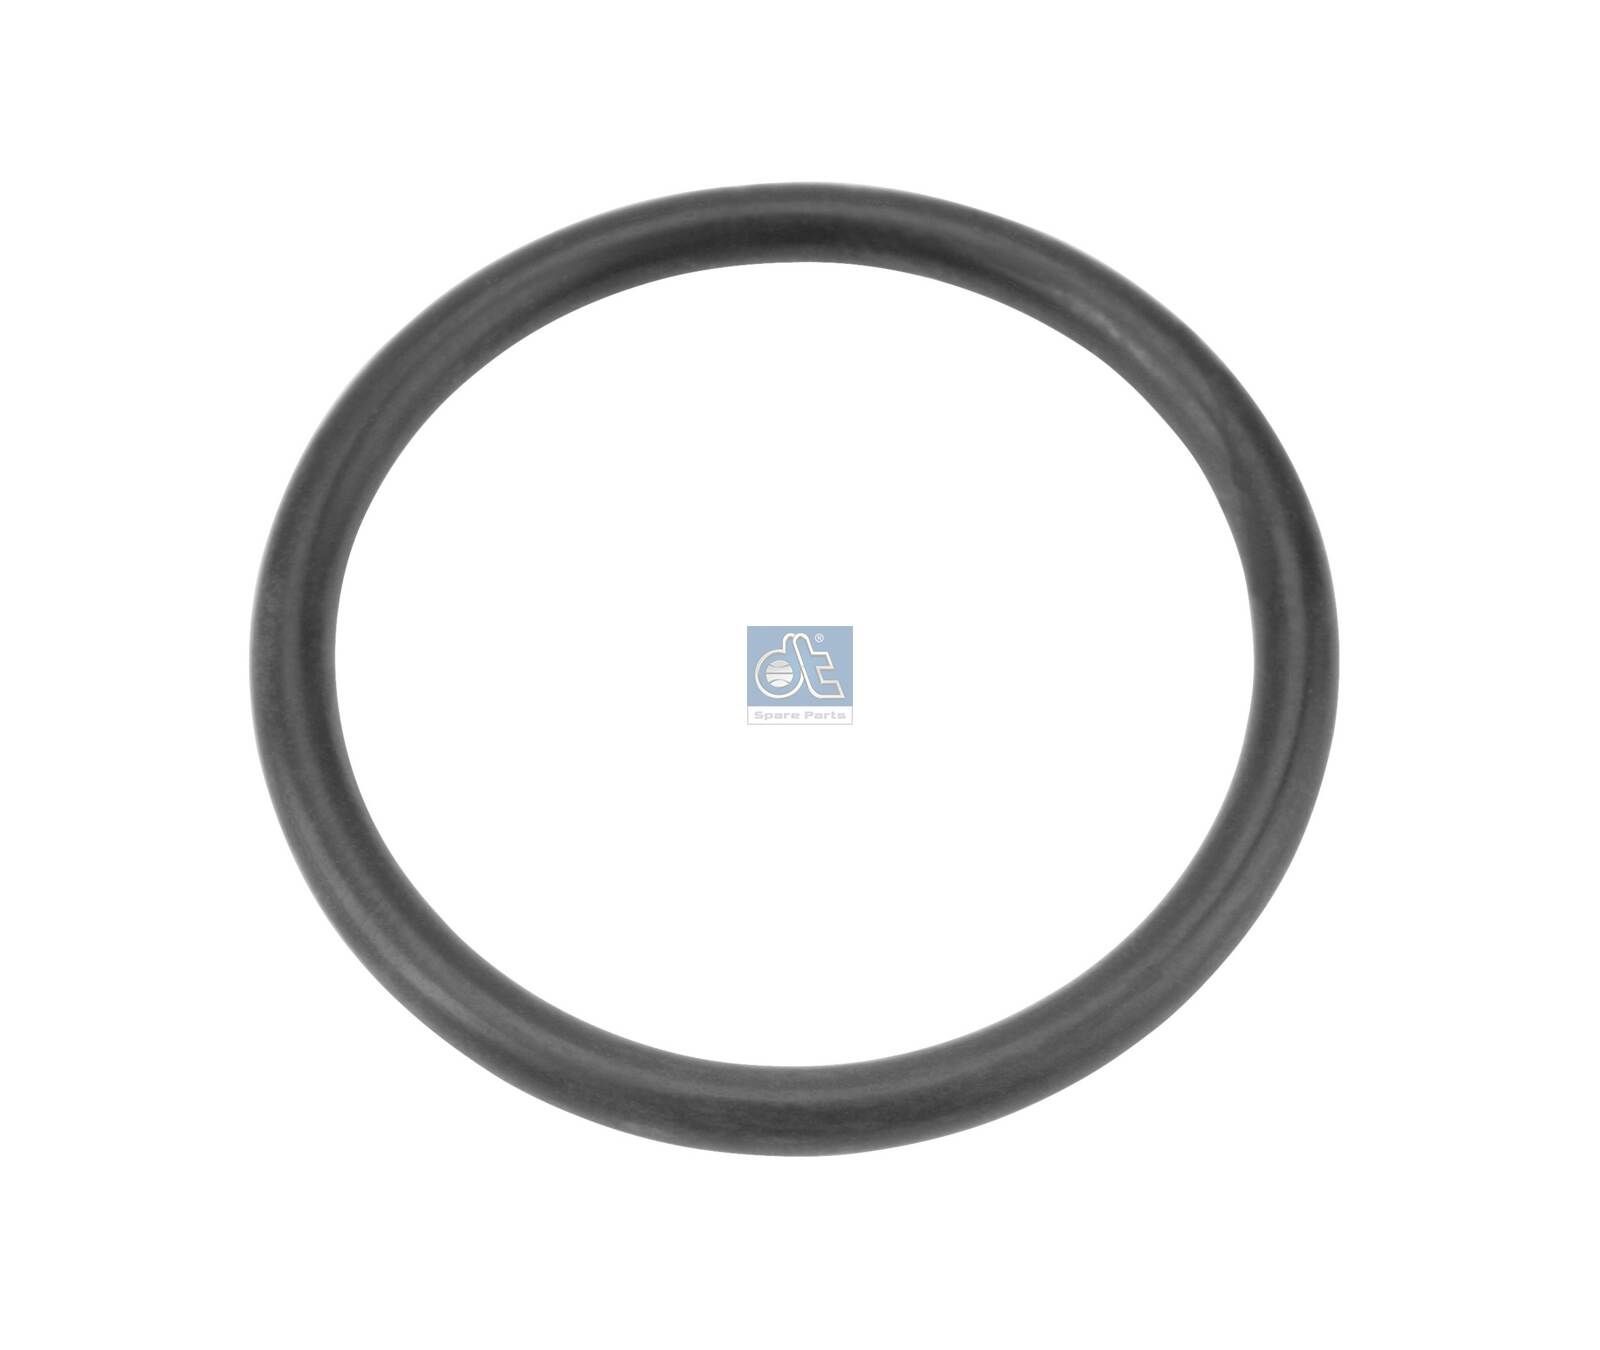 DT Spare Parts 36,5 x 3,5 mm, O-Ring, NBR (nitrile butadiene rubber) Seal Ring 3.10175 buy